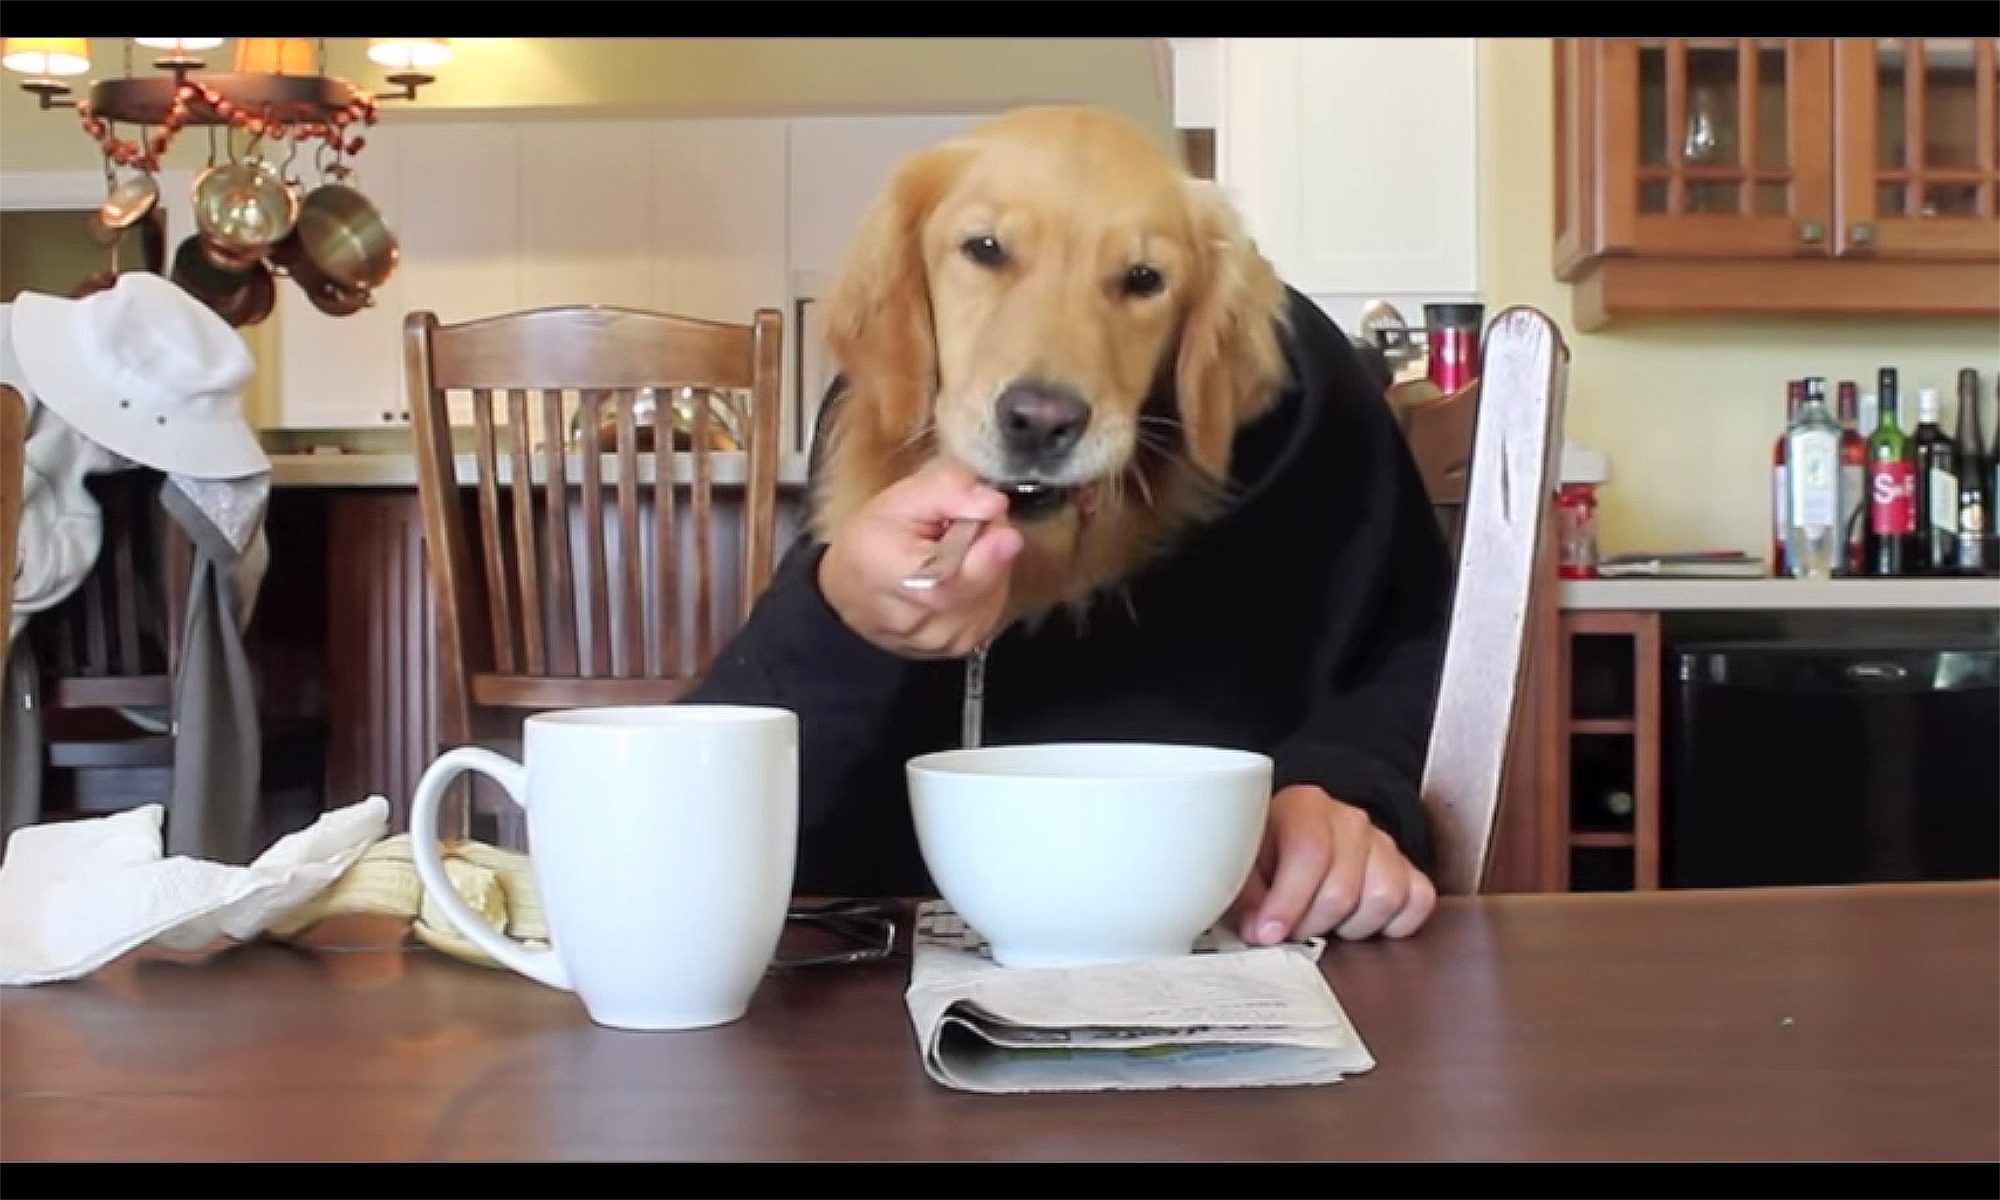 Impossible would you rather questions - dog eating at table with human hands -